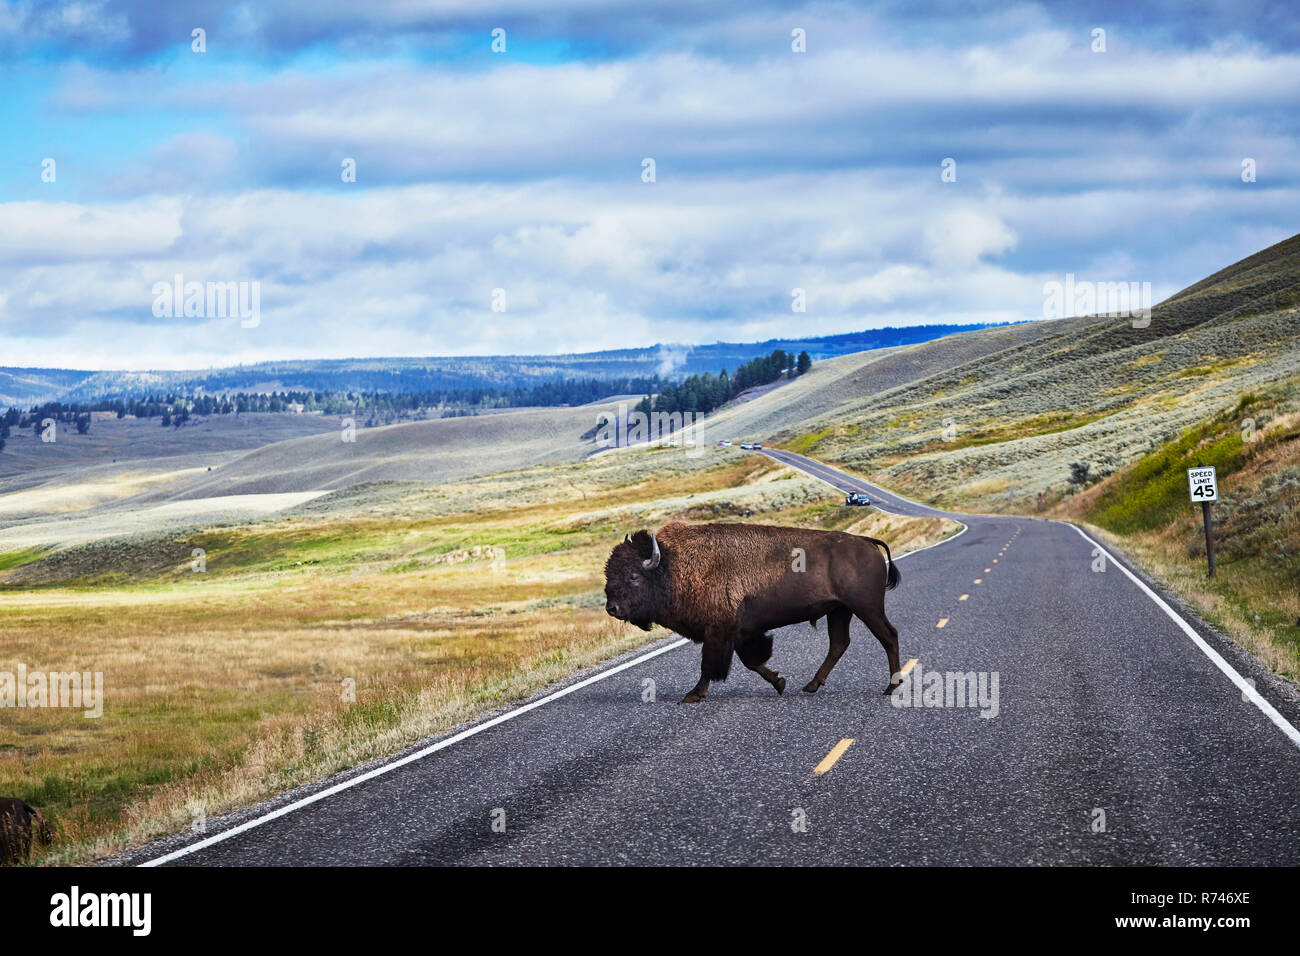 Bison crossing road, Yellowstone National Park, Canyon Village, Wyoming, USA Stock Photo